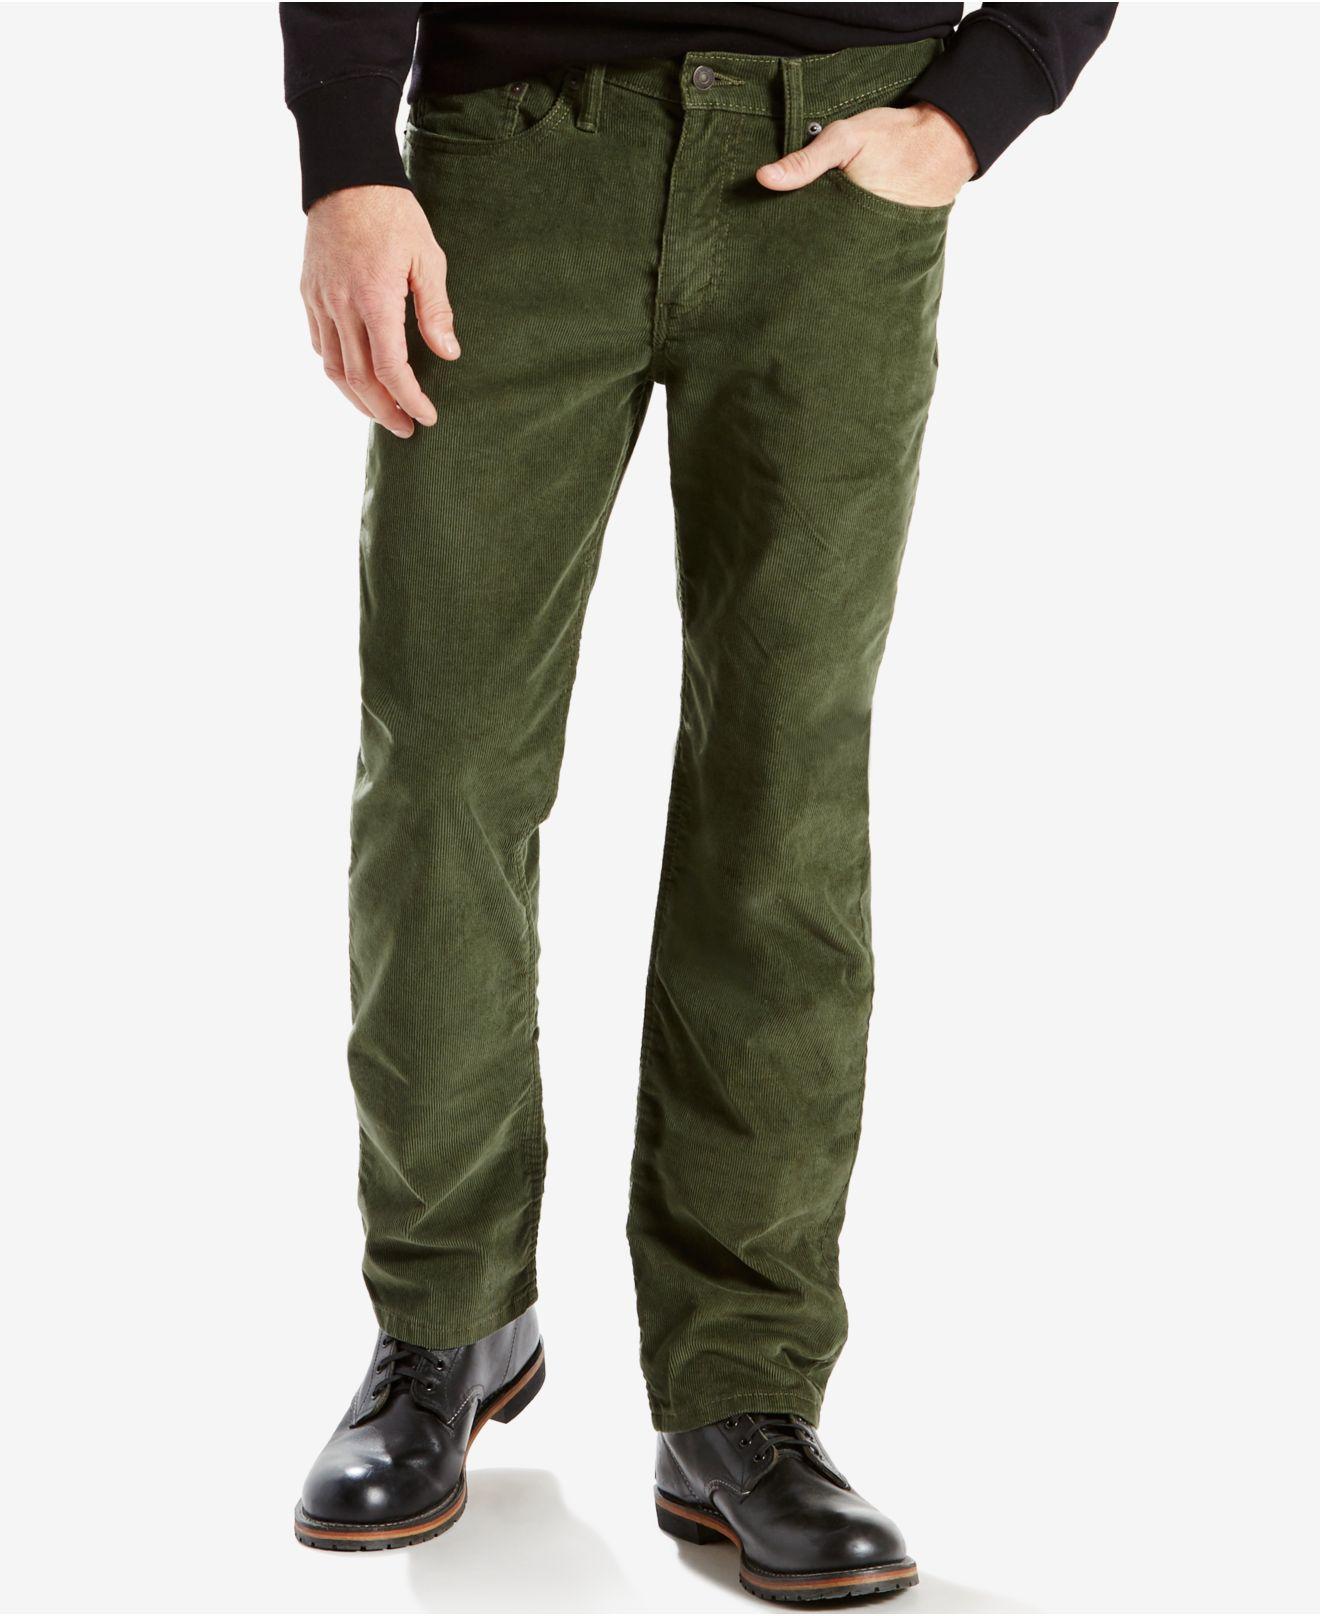 Levi's 514 Straight Fit Padox Canvas Twill Pants in Green for Men - Lyst